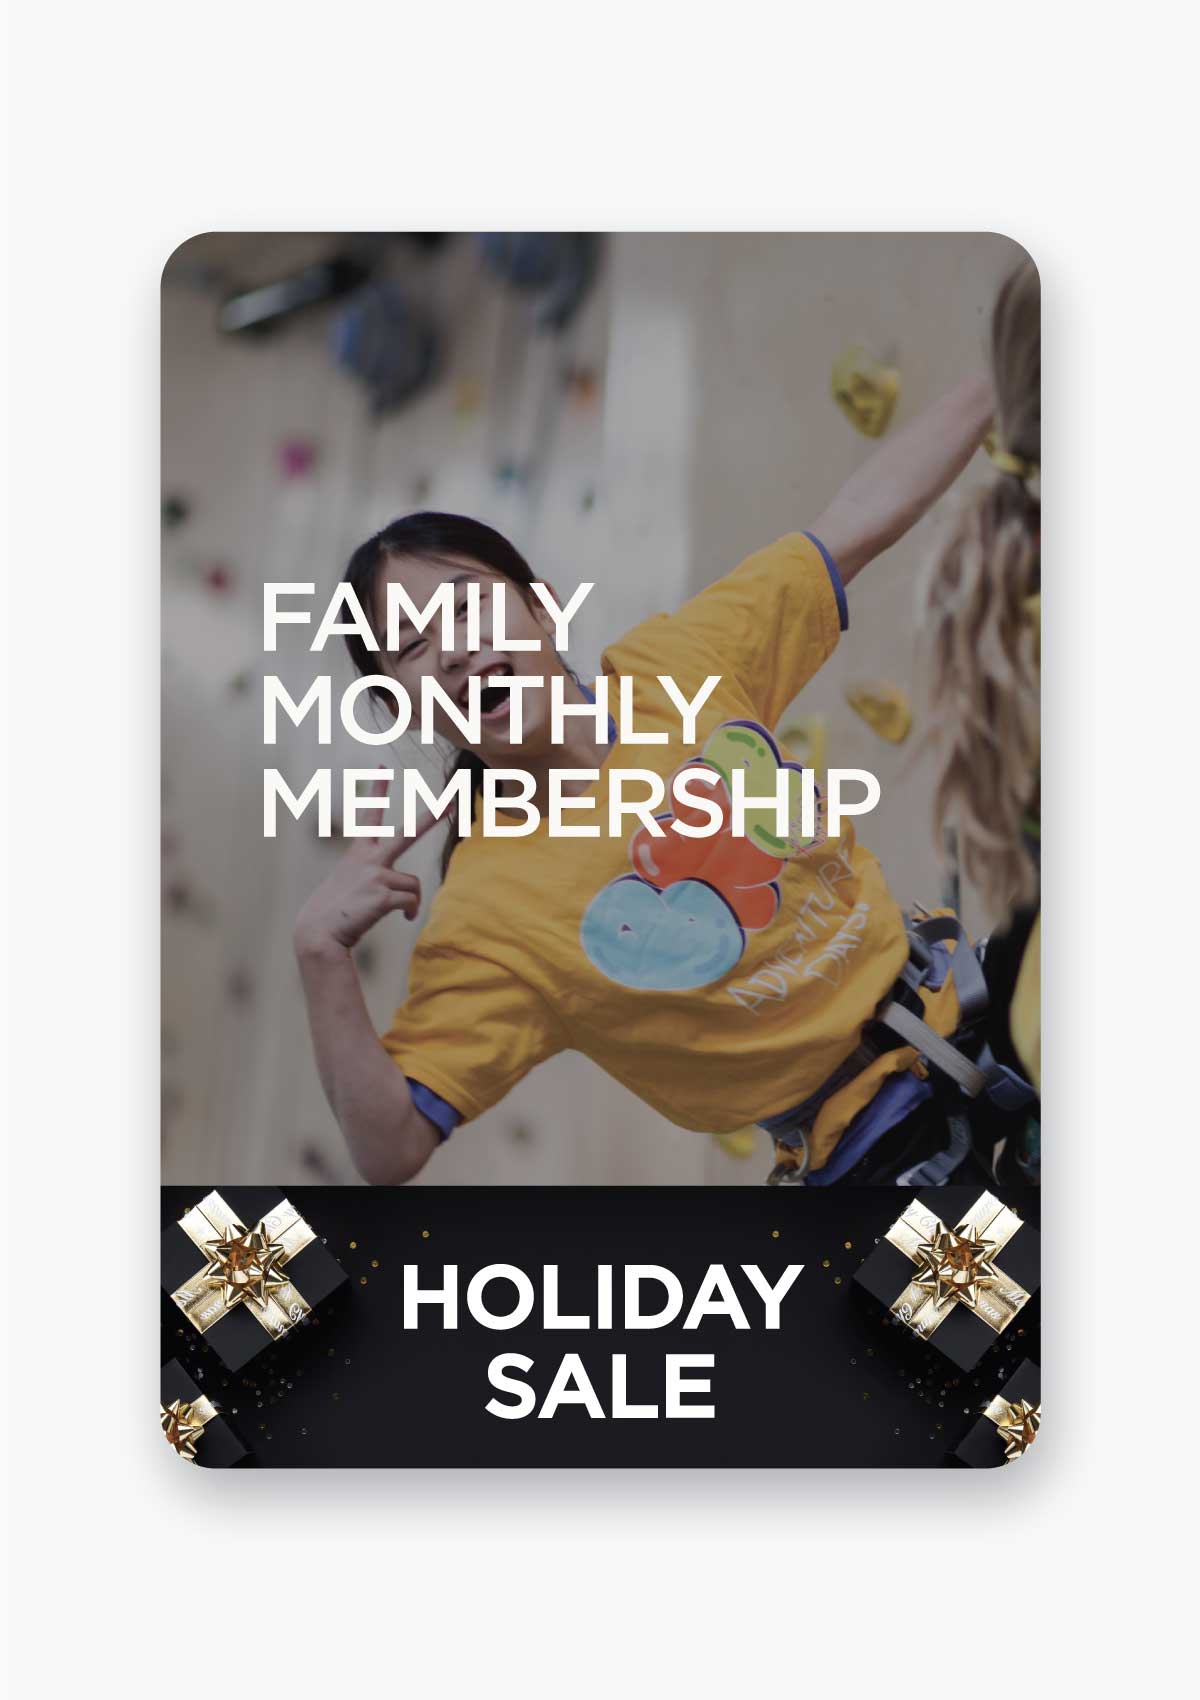 HOLIDAY FAMILY MONTHLY MEMBERSHIP